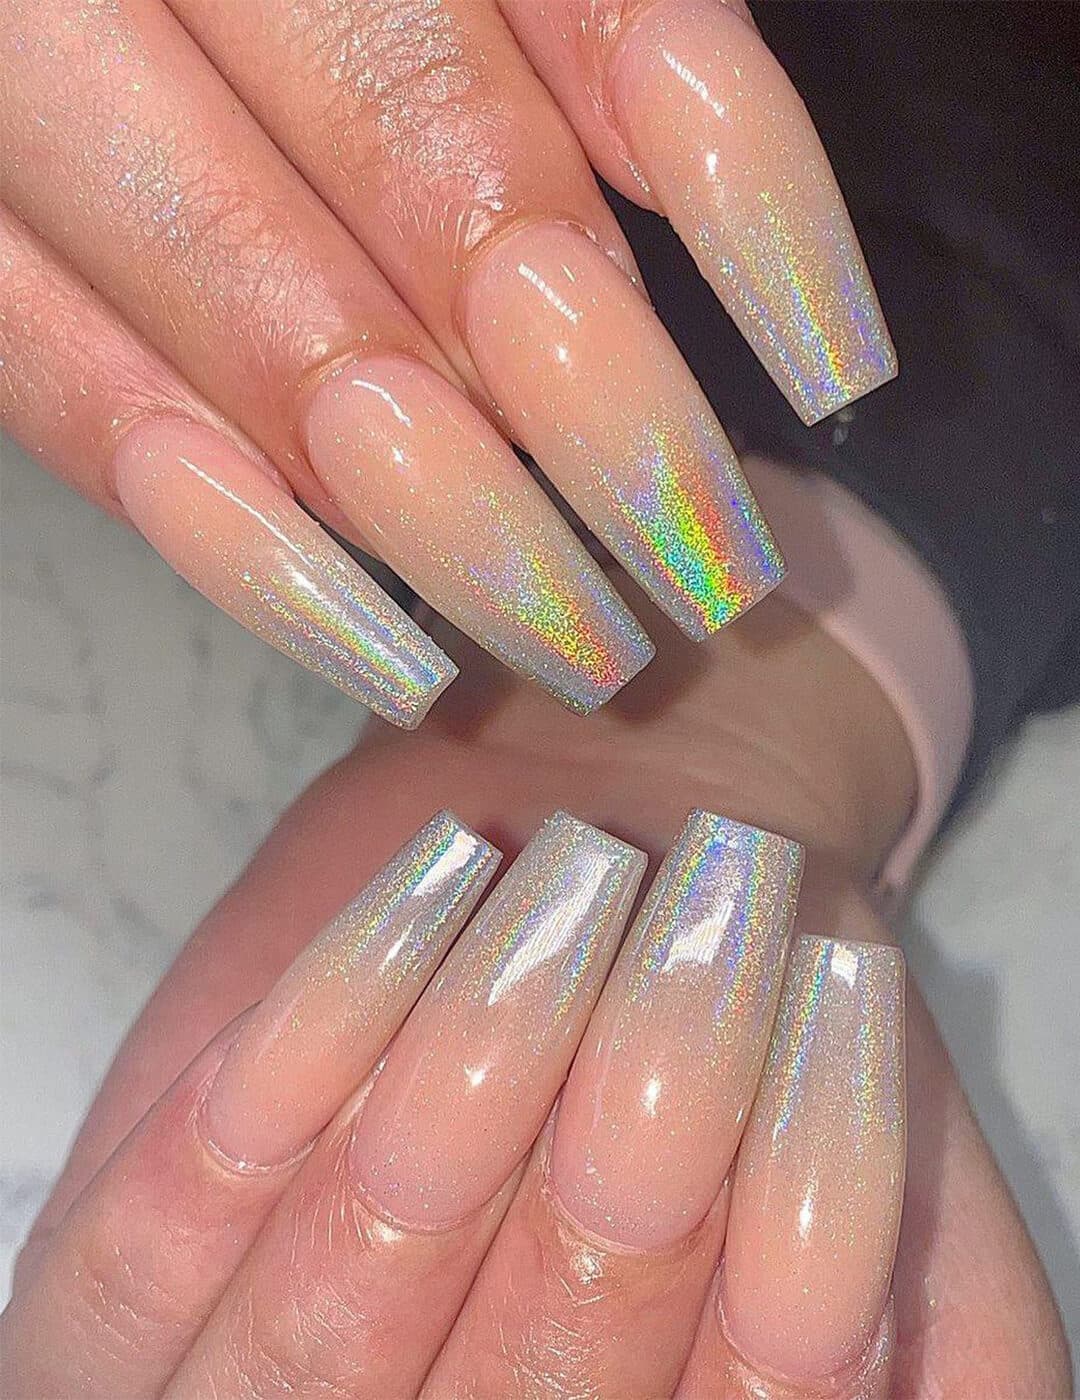 Close-up of woman's holographic ombré nail art